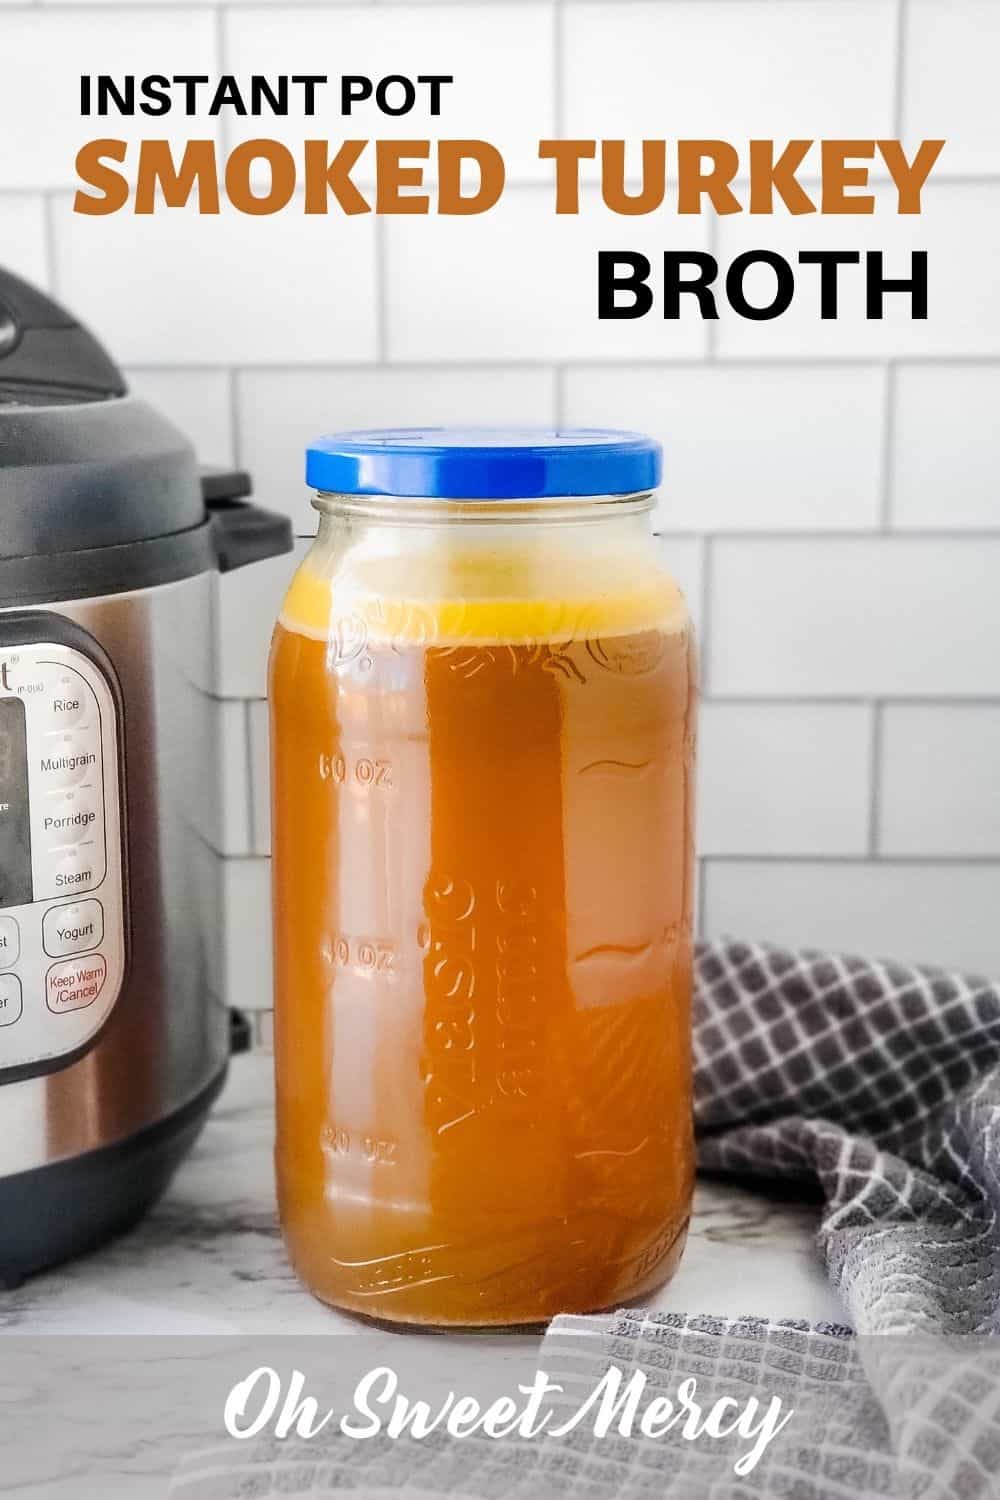  Save your smoked turkey frame and make the most amazing and magical smoked turkey broth easily in your Instant Pot. Turns out perfect, and gels, every time! Wonderful for soups, stews, cooking grains, and making the best ever gravy. #instantpot #bonebroth #smokedturkey #thm @ohsweetmercy